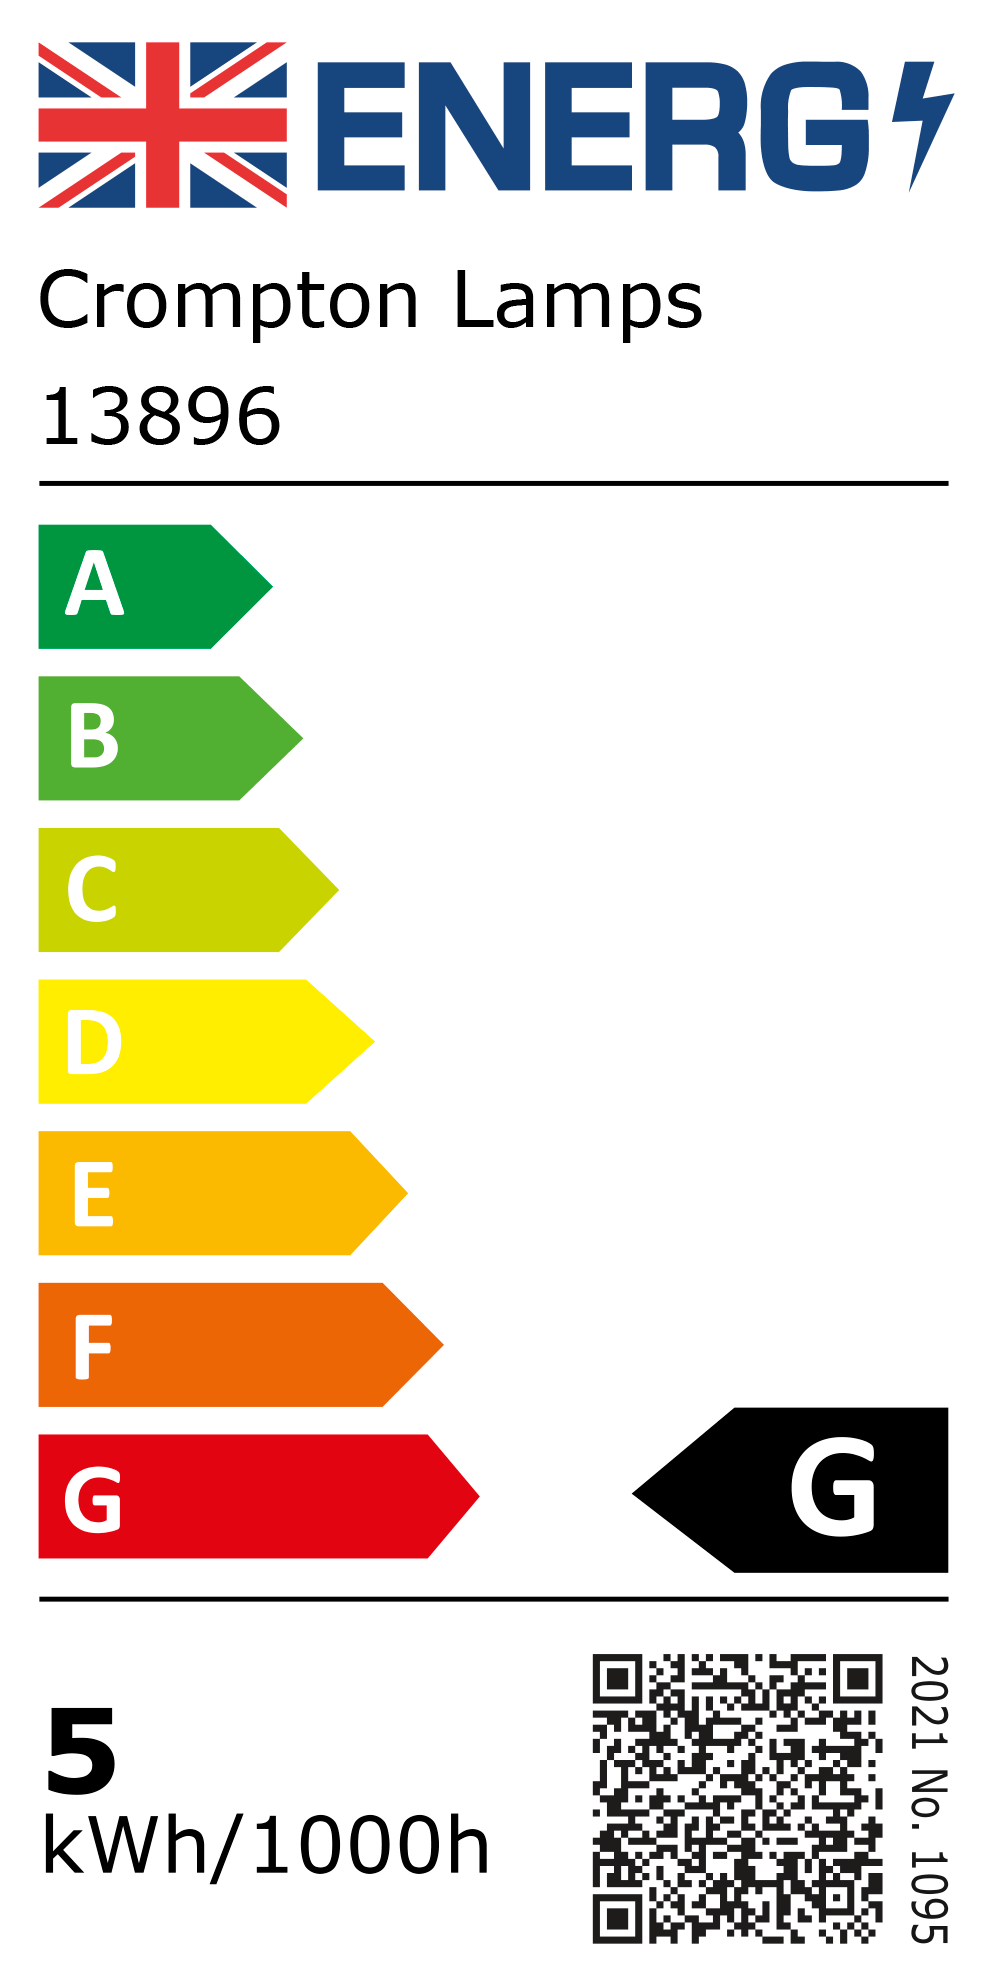 New 2021 Energy Rating Label: Stock Code 13896